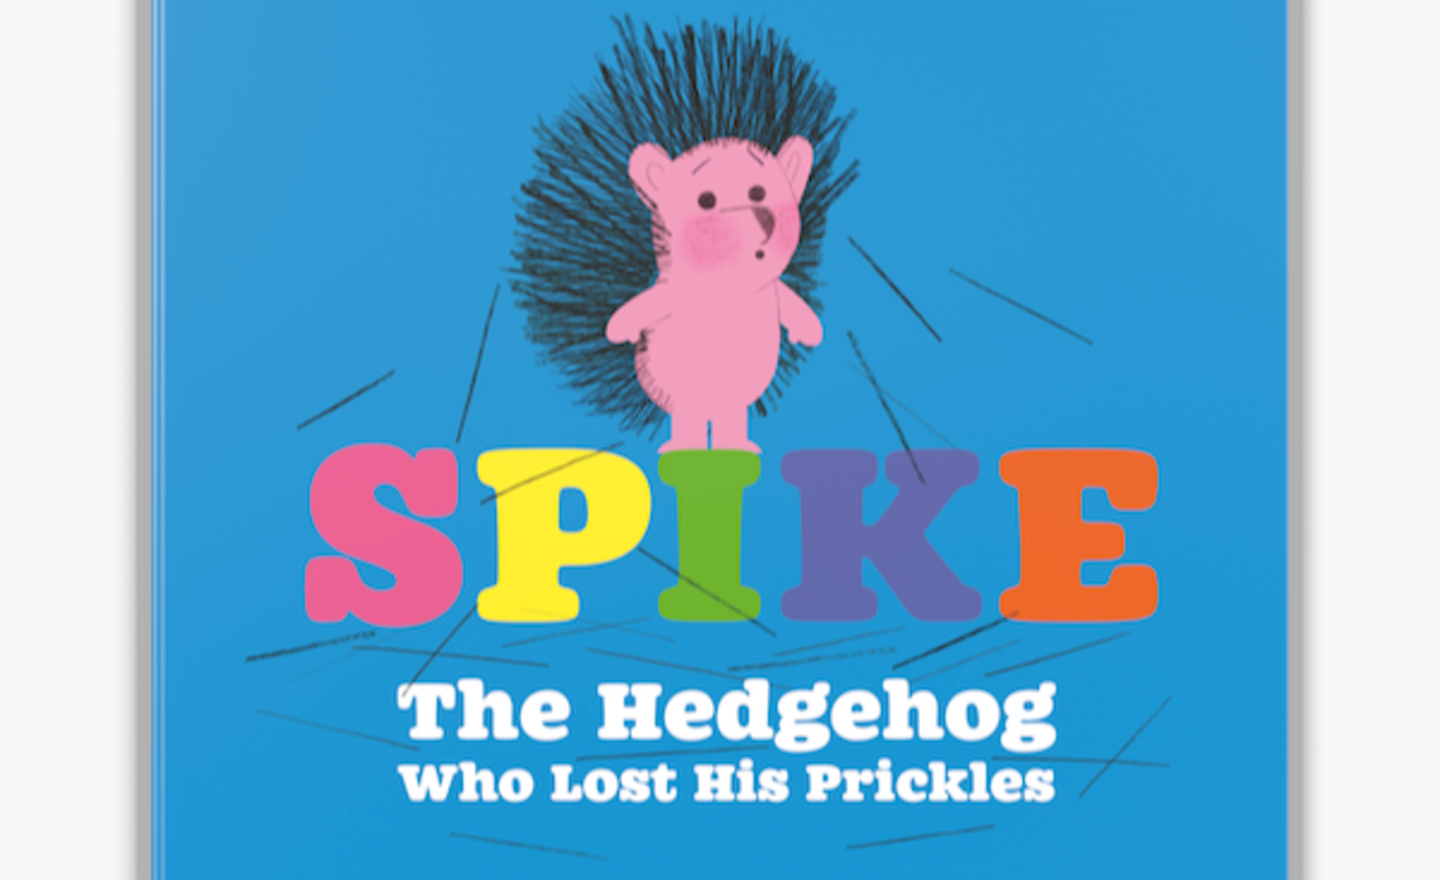 Image of Spike - The Hedgehog who lost his prickles